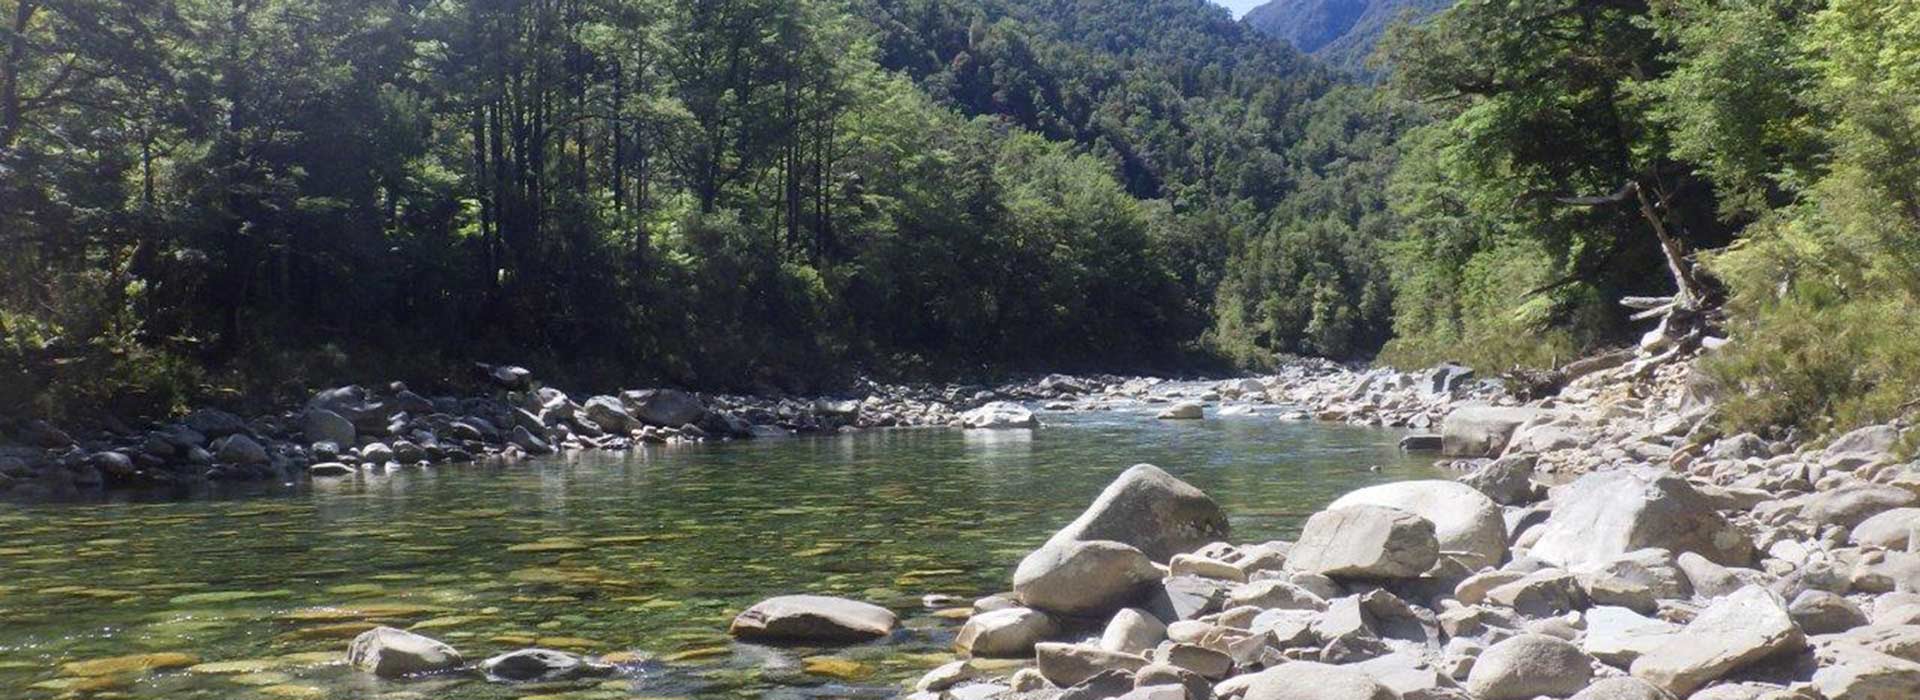 New Zealand's South Island Trout Fishing Guide